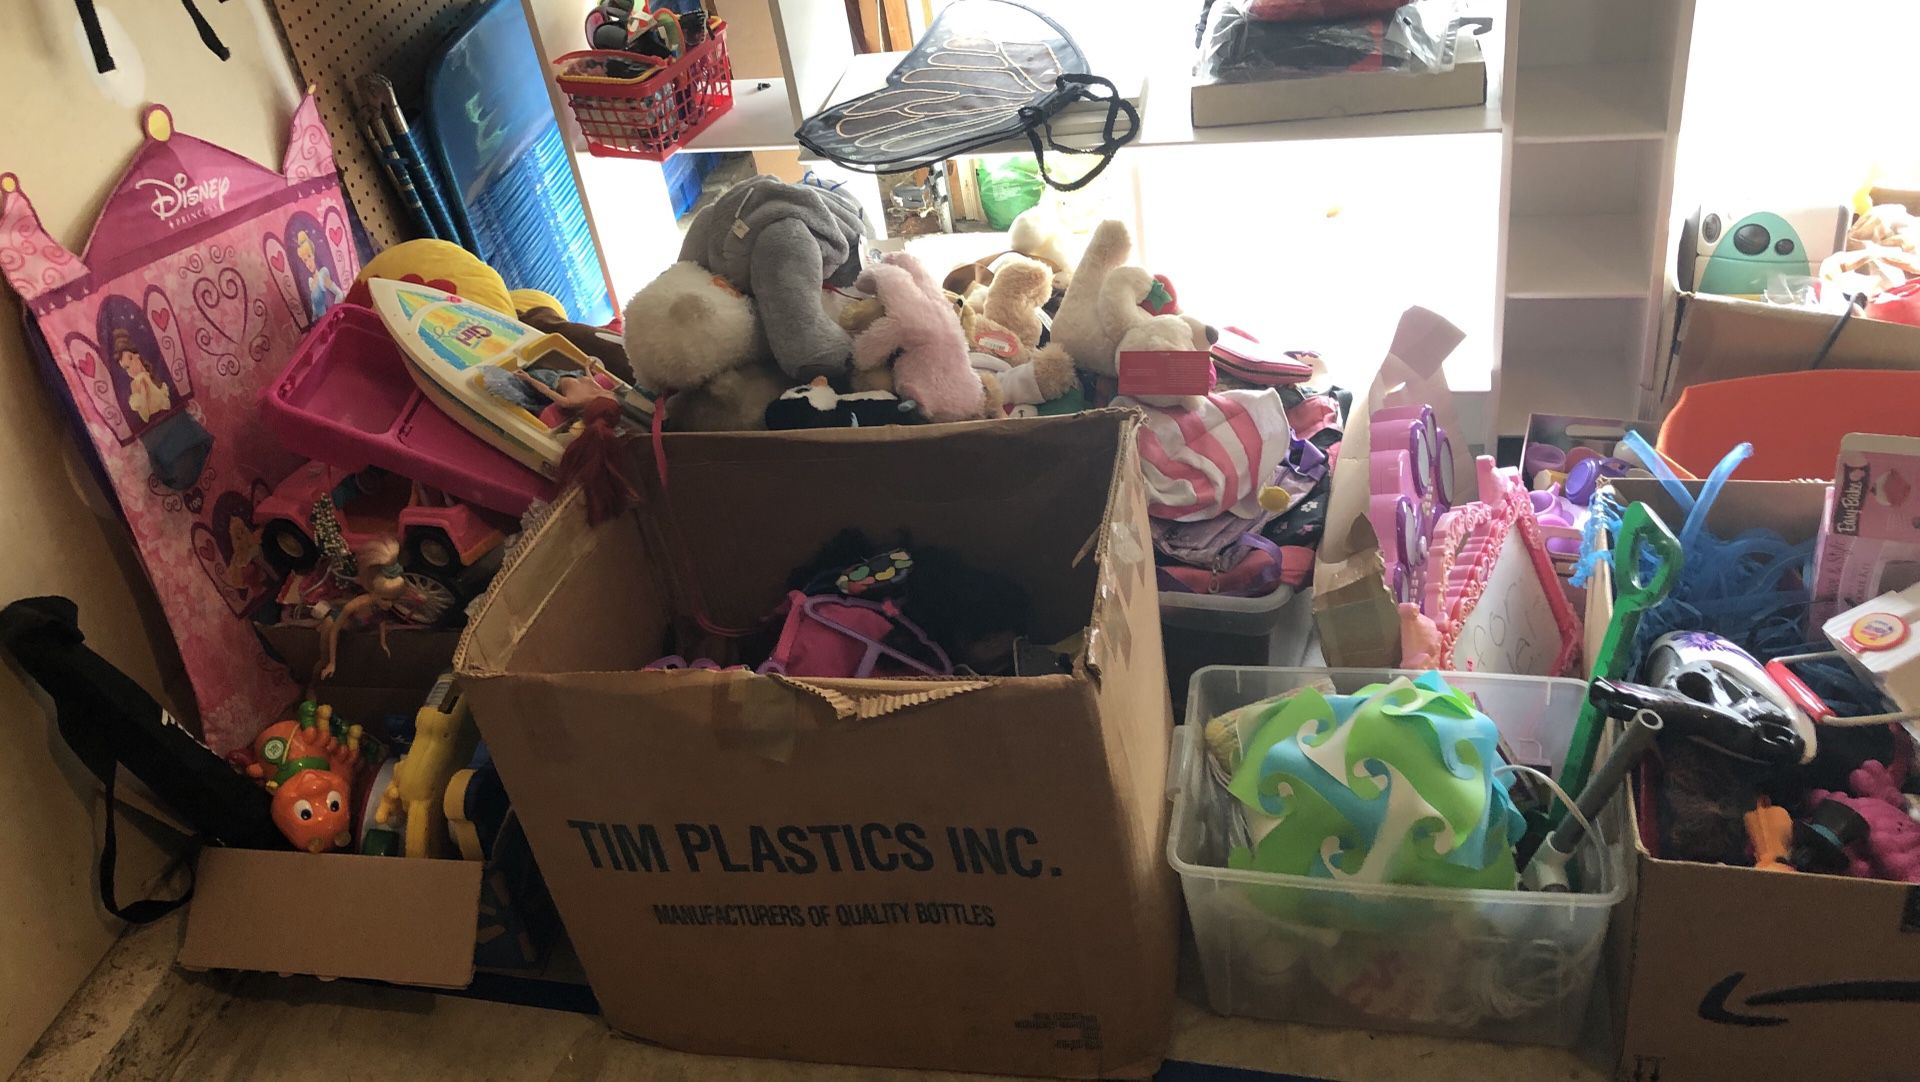 Toys, barbies, dishes, stuffed animals etc